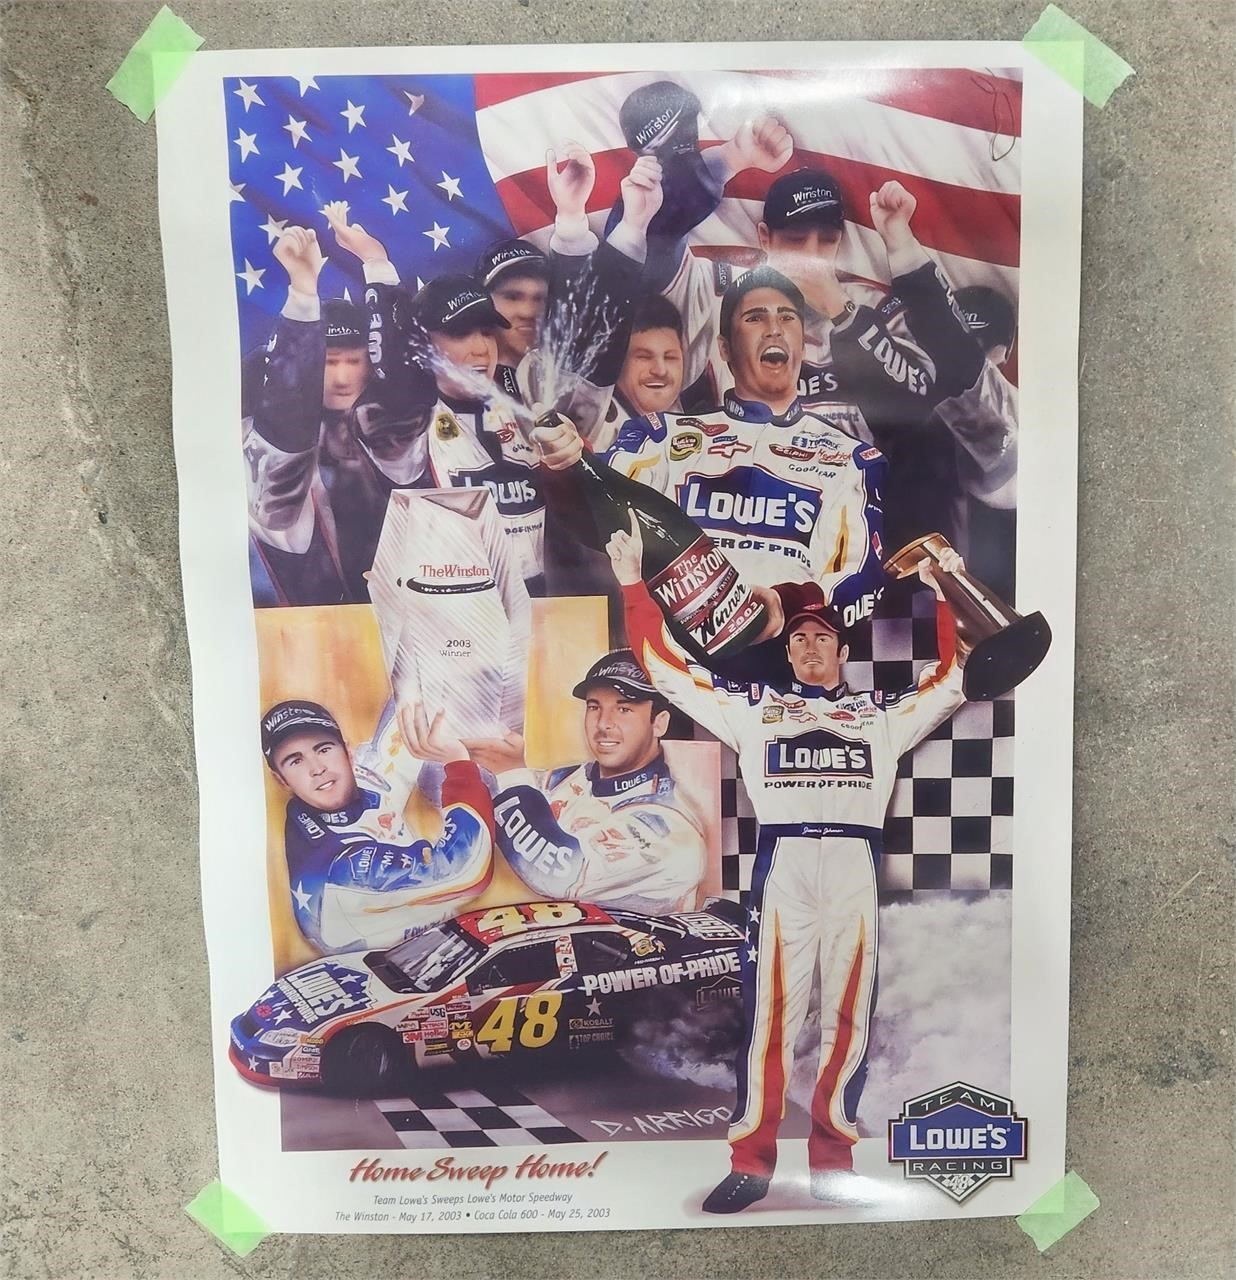 2003 Jimmy Johnson Home Sweep Home Lowes Poster